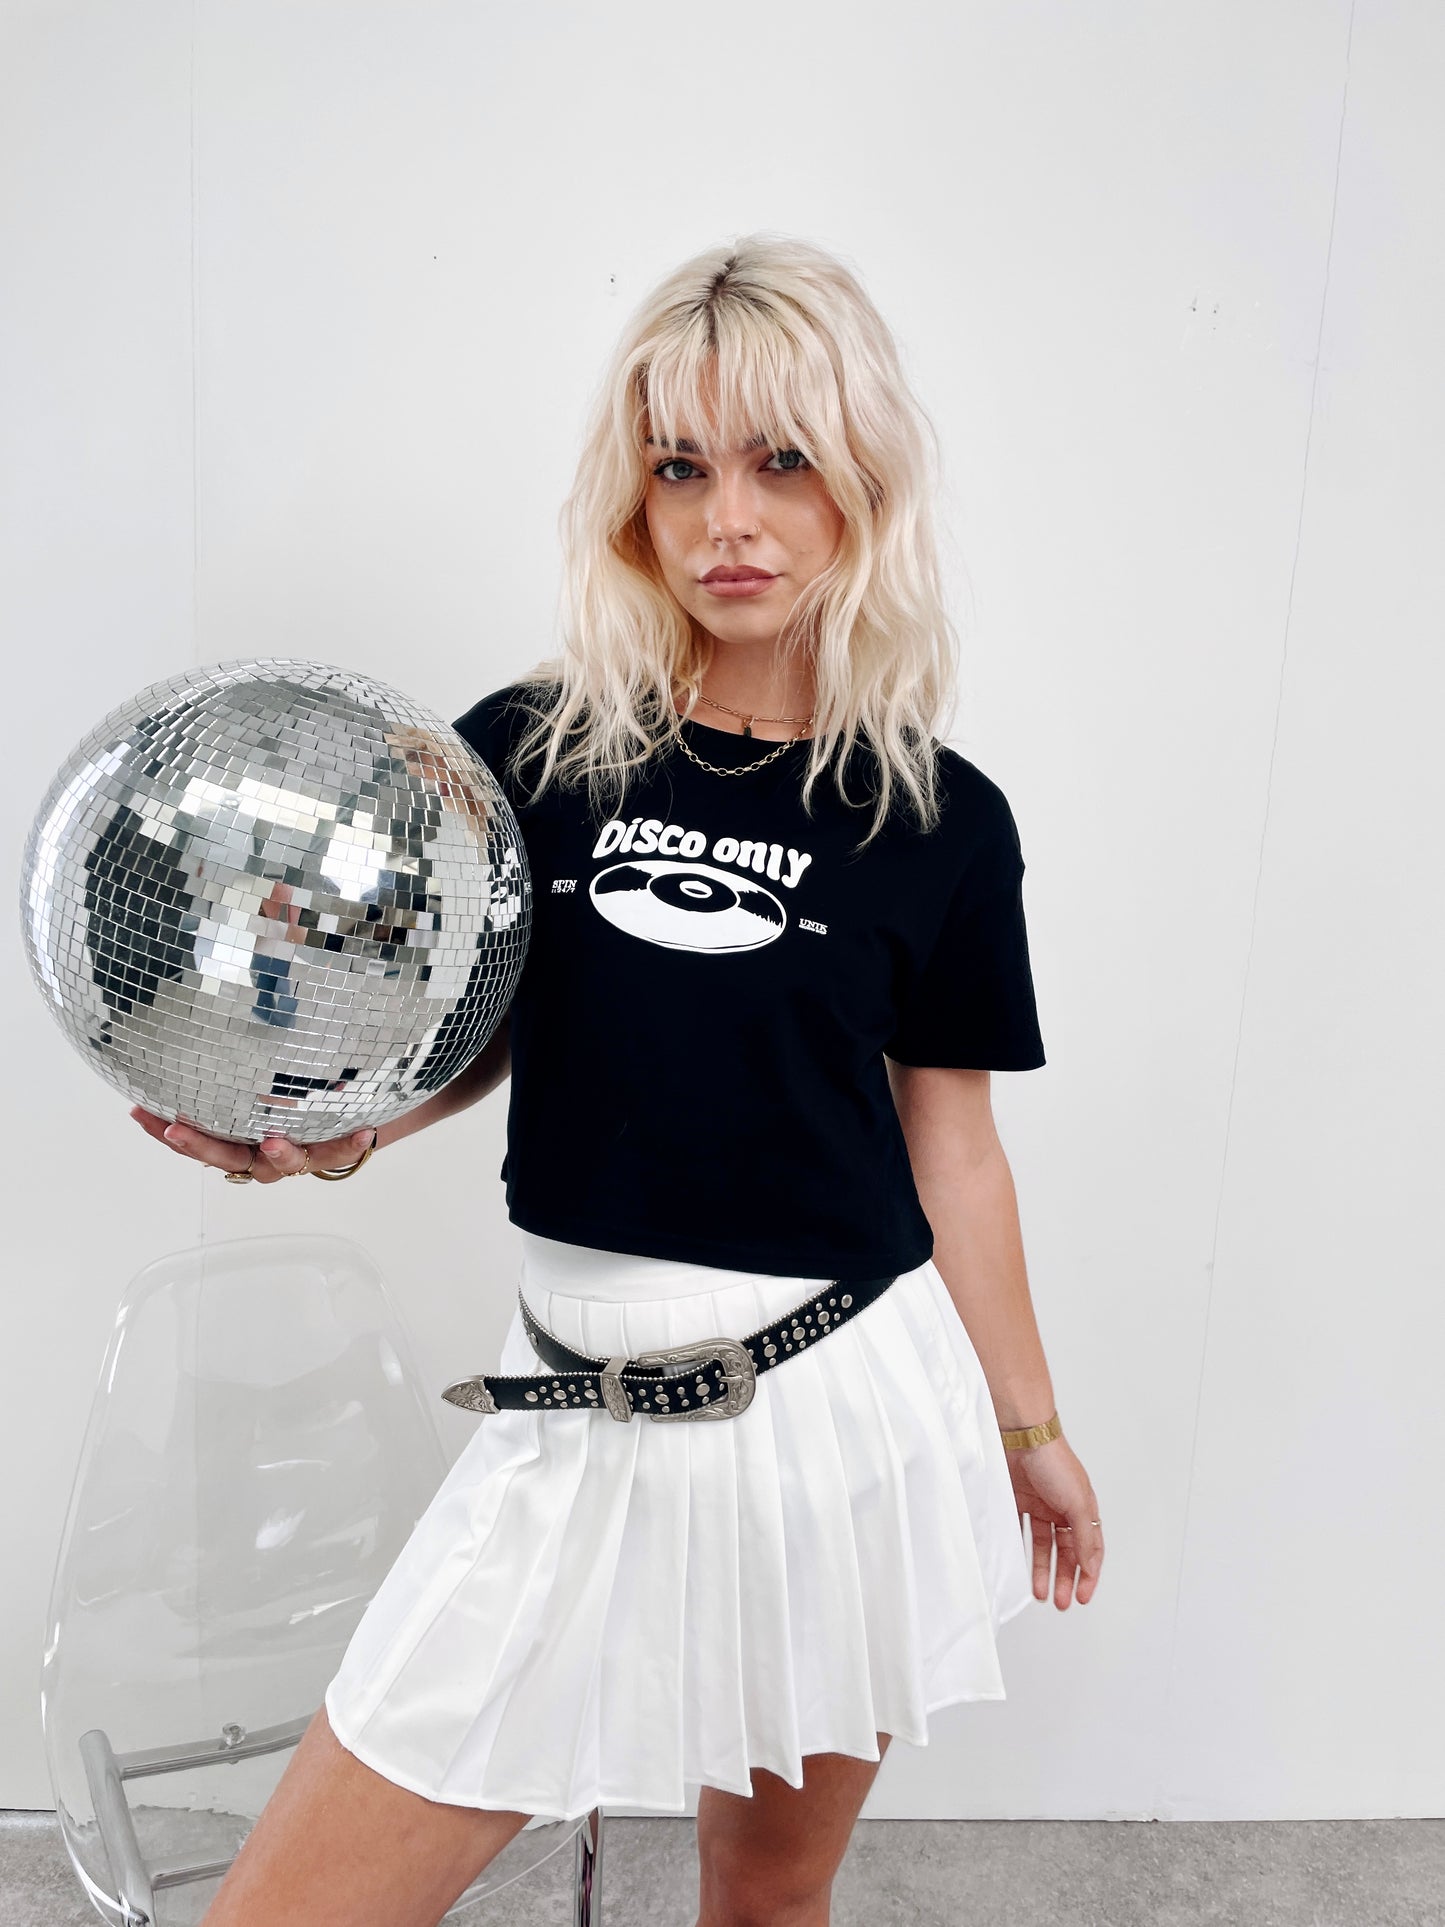 DISCO ONLY WMNS 'Mr Phomer' Cropped Tee - Black